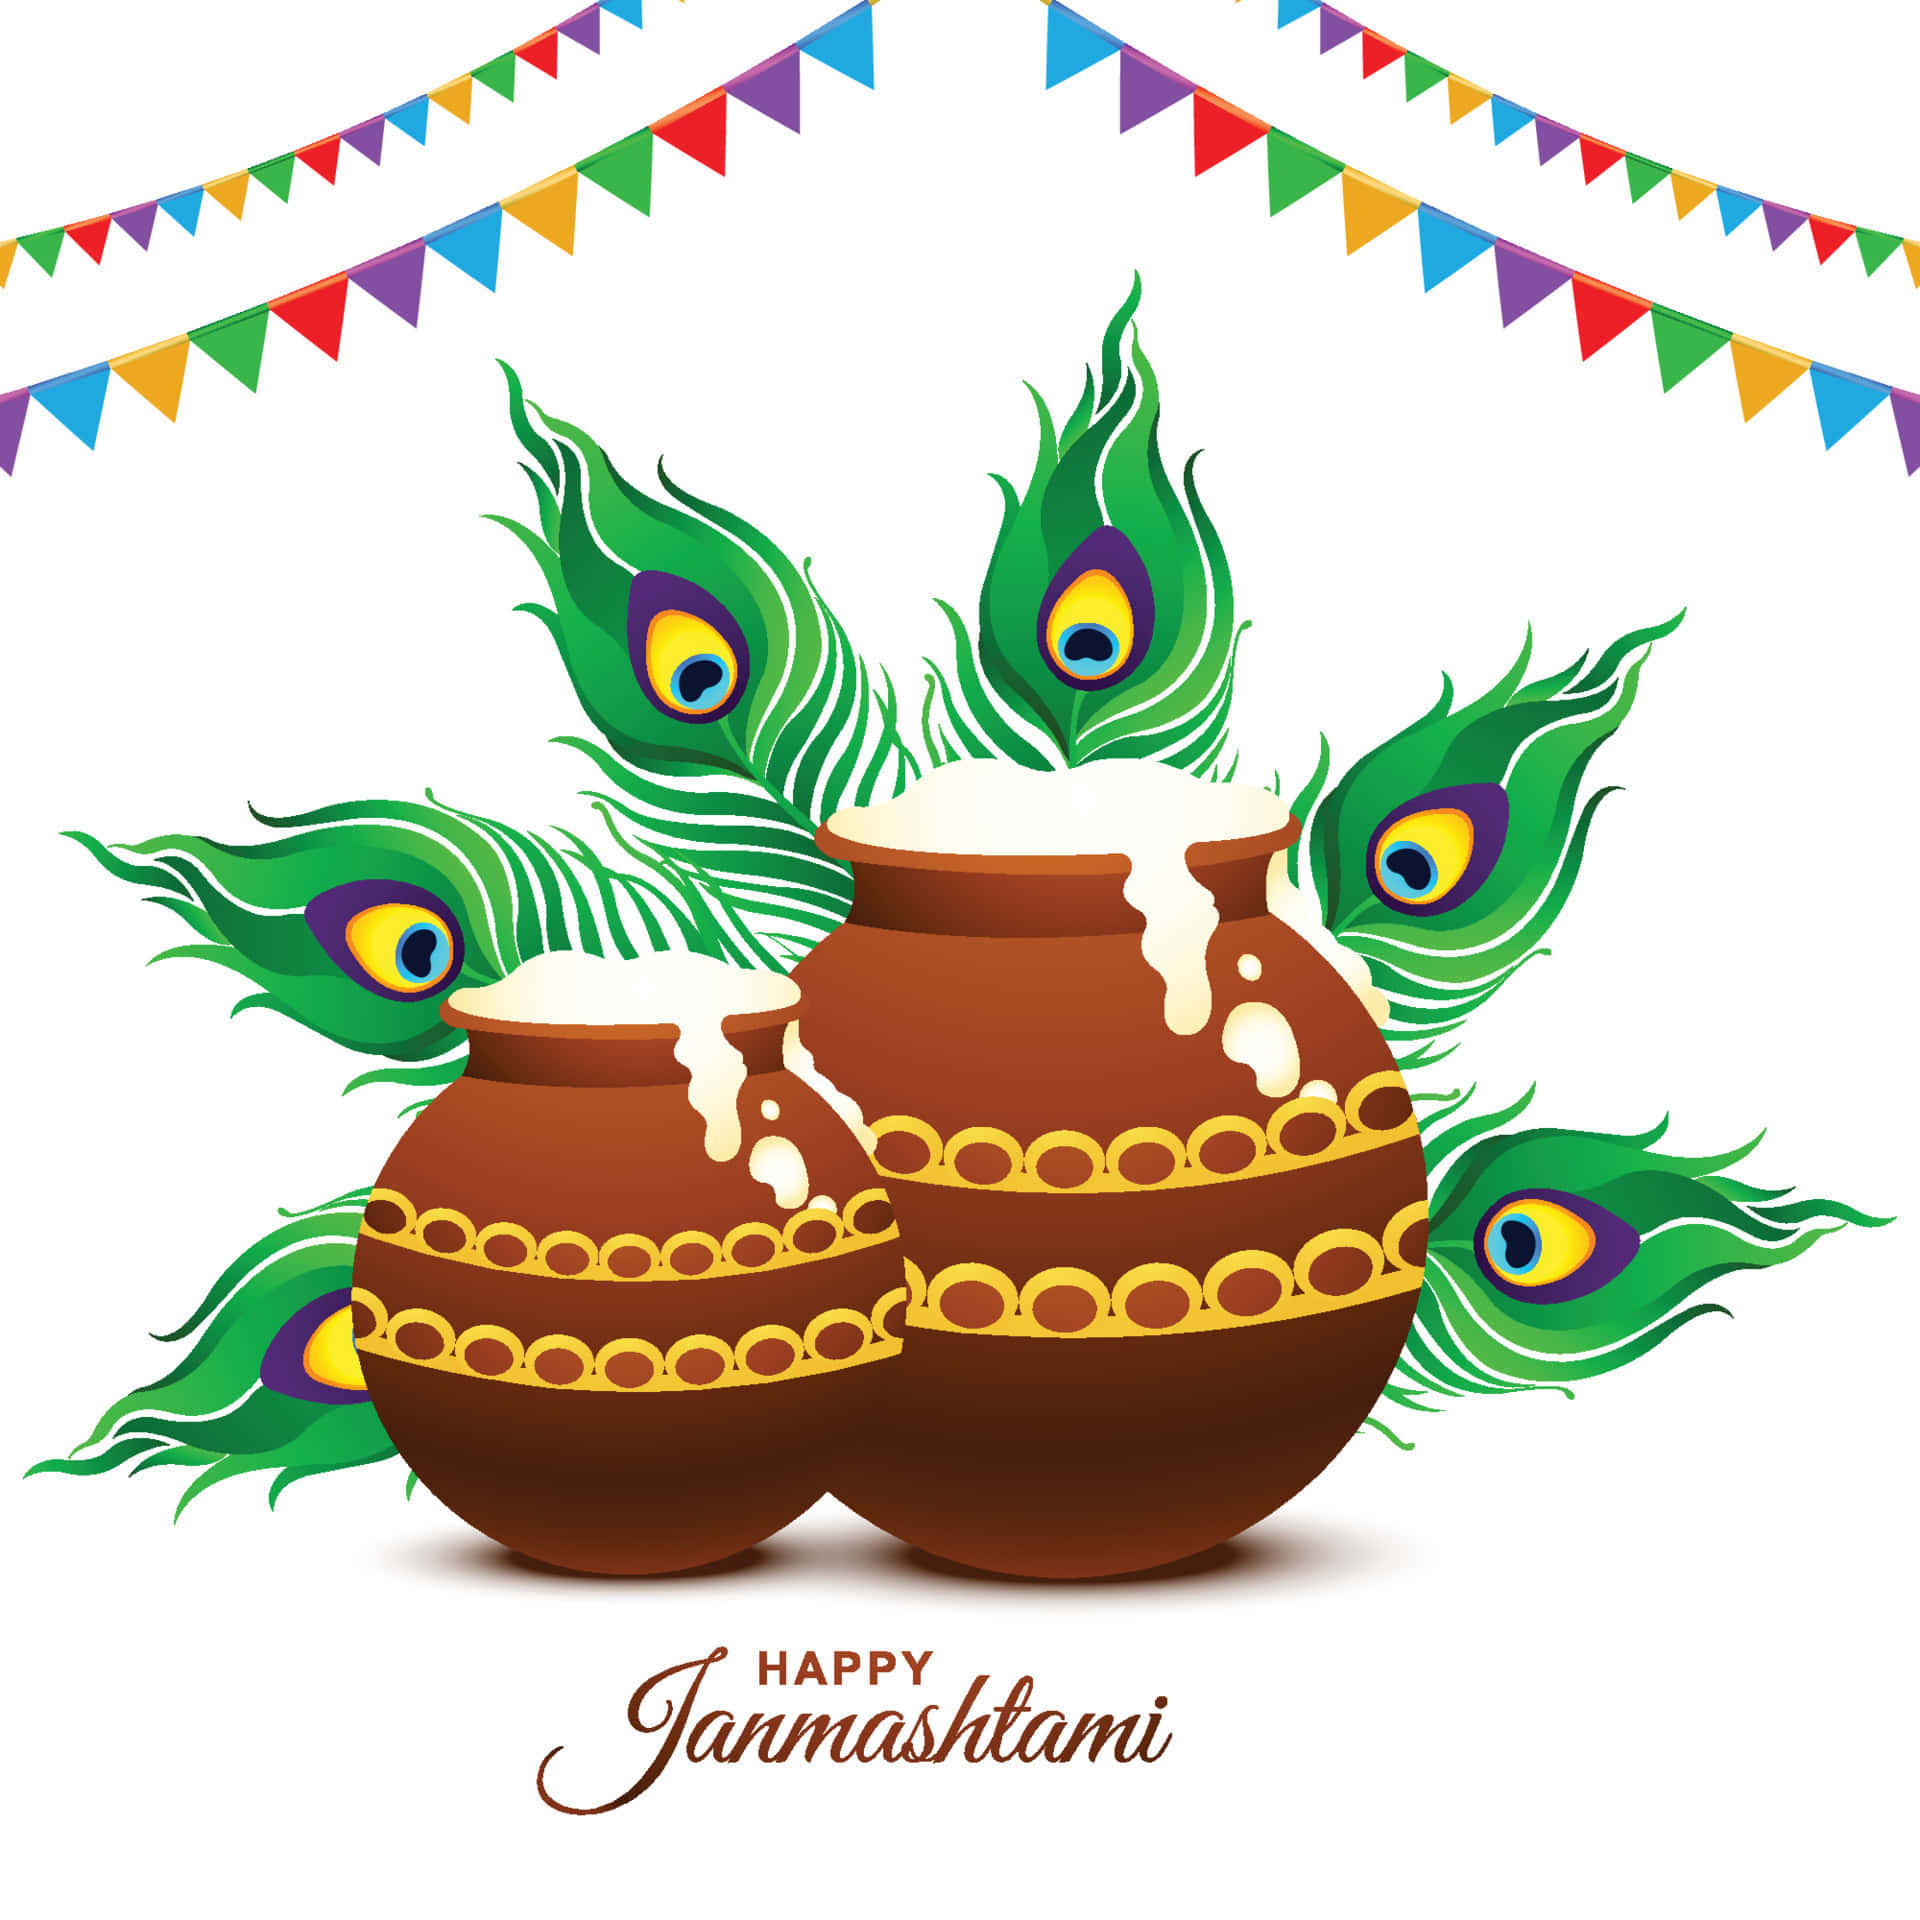 Happy Janmashtami Greetings With Peacock Feathers And A Pot